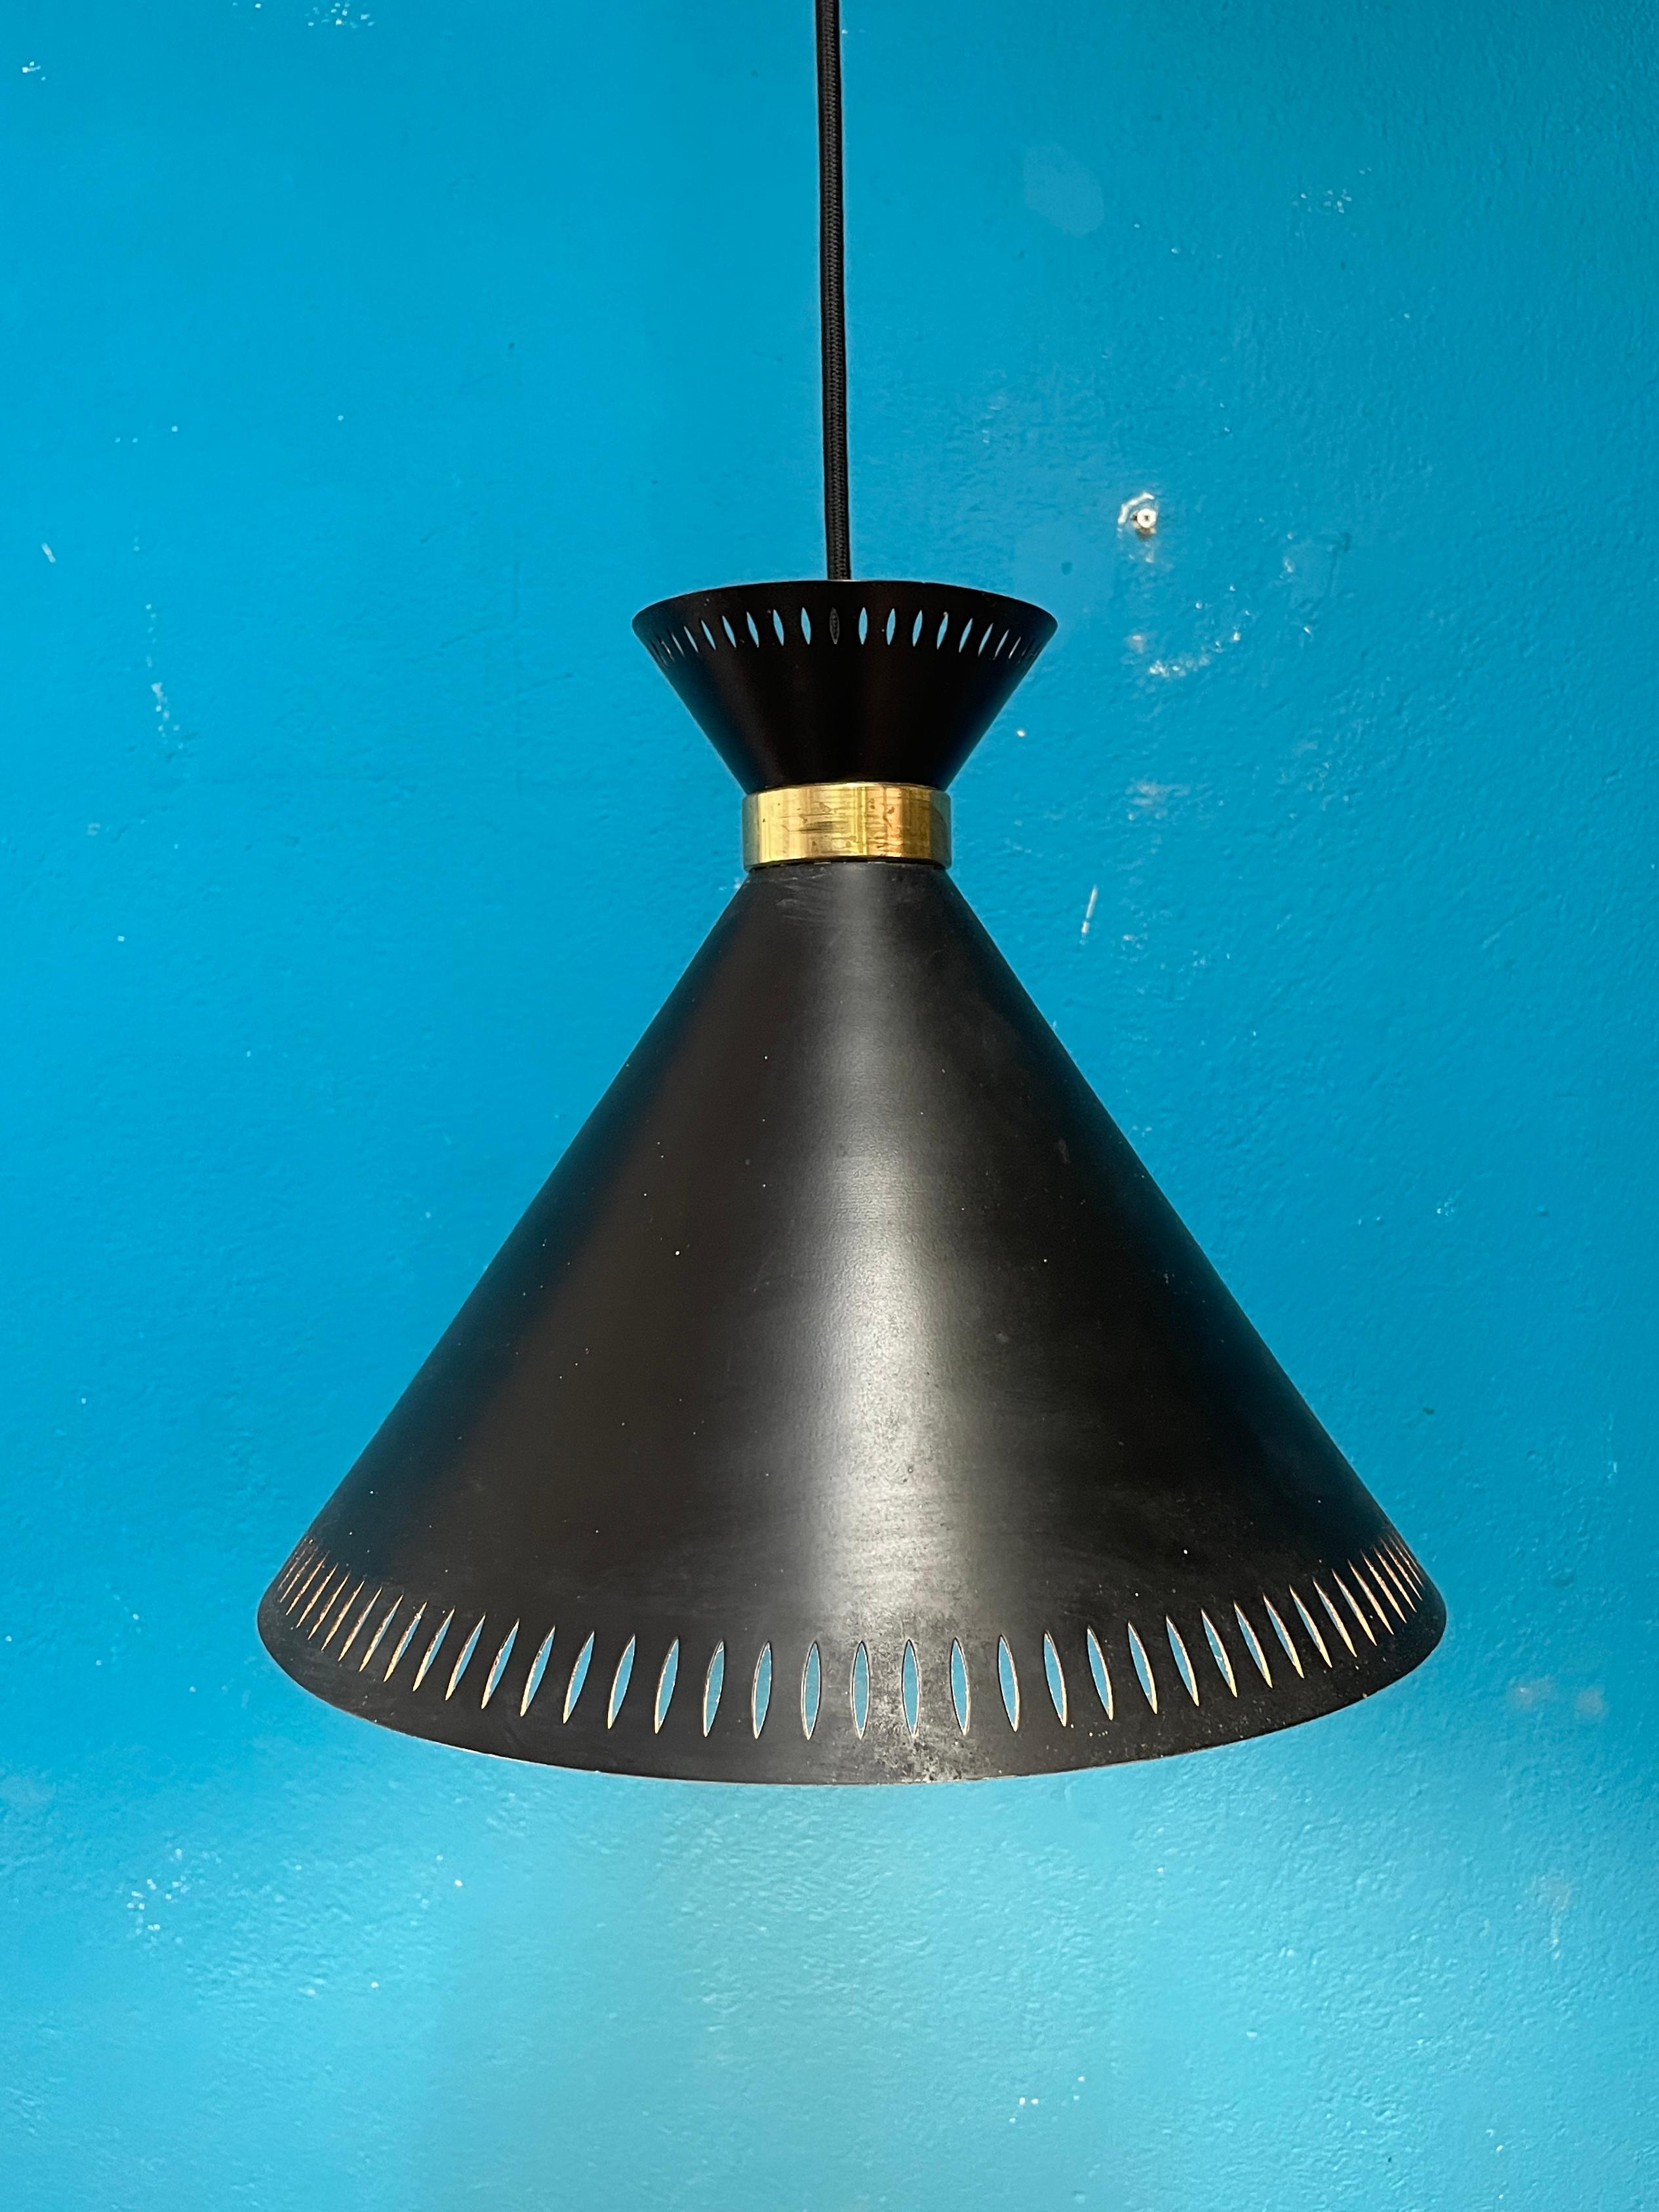 Beautiful Black colored pendant by Valinte Finland. Pierced shade with white inner surface and brass detail. The design has clearly been influenced by Paavo Tynell and Tapio Wirkkala designs. Designer of this lamp is unknown.

New Wires, length of